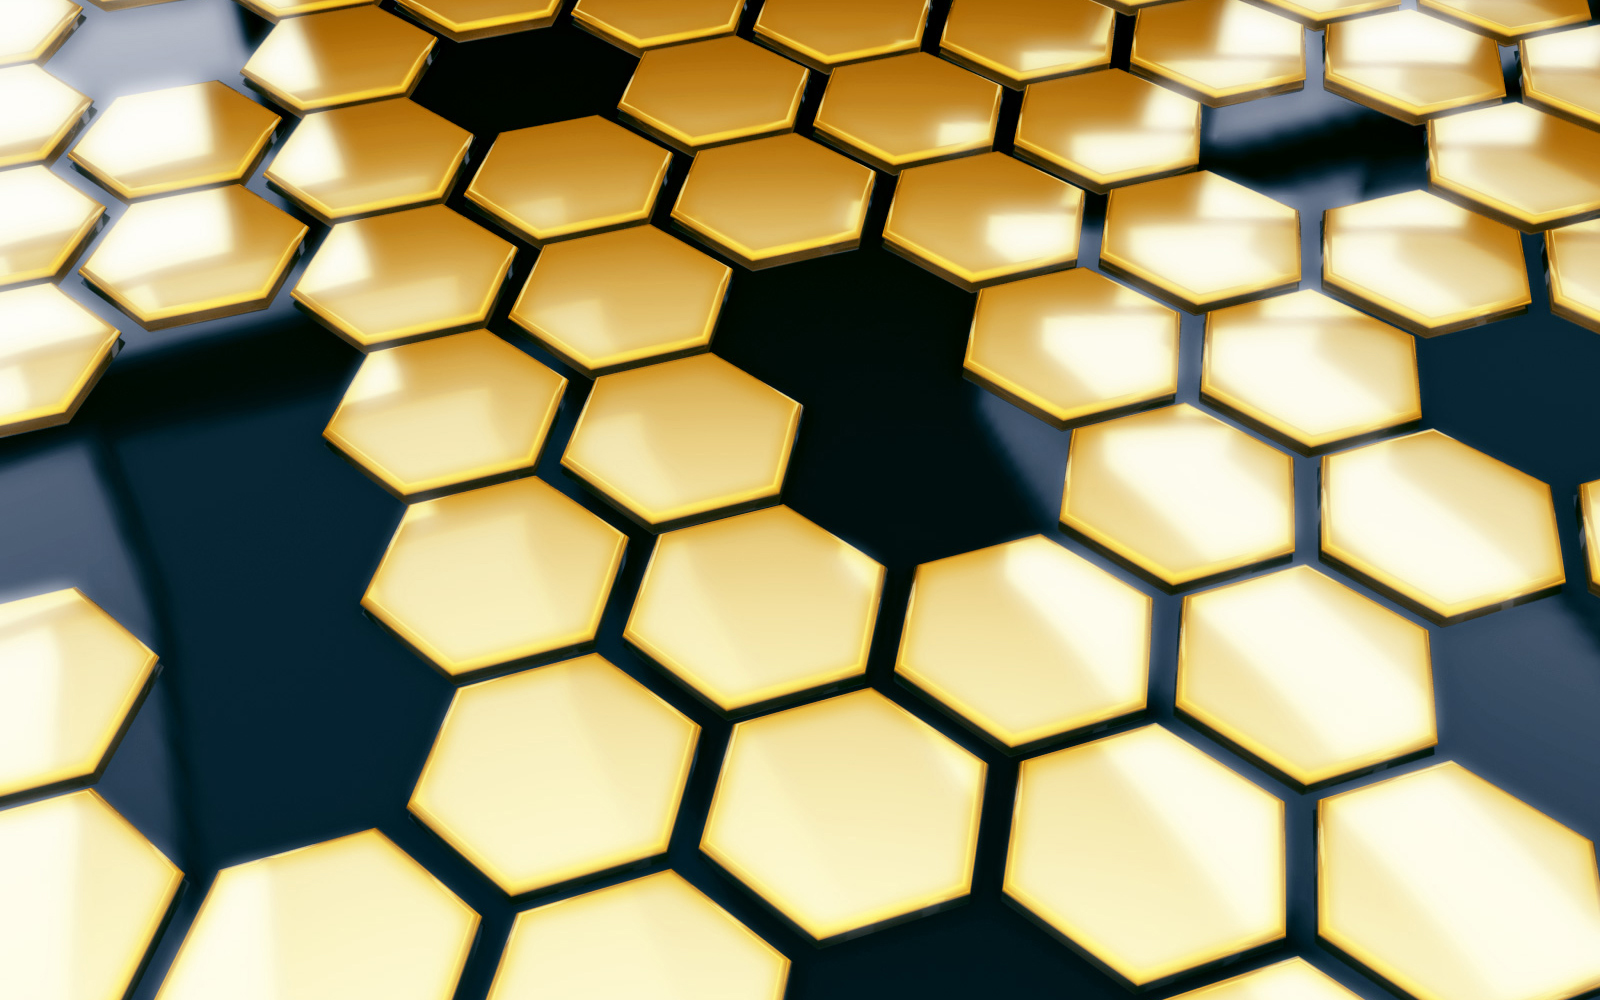 Hexagon Wallpapers Pictures Images HD Wallpapers Download Free Images Wallpaper [wallpaper981.blogspot.com]